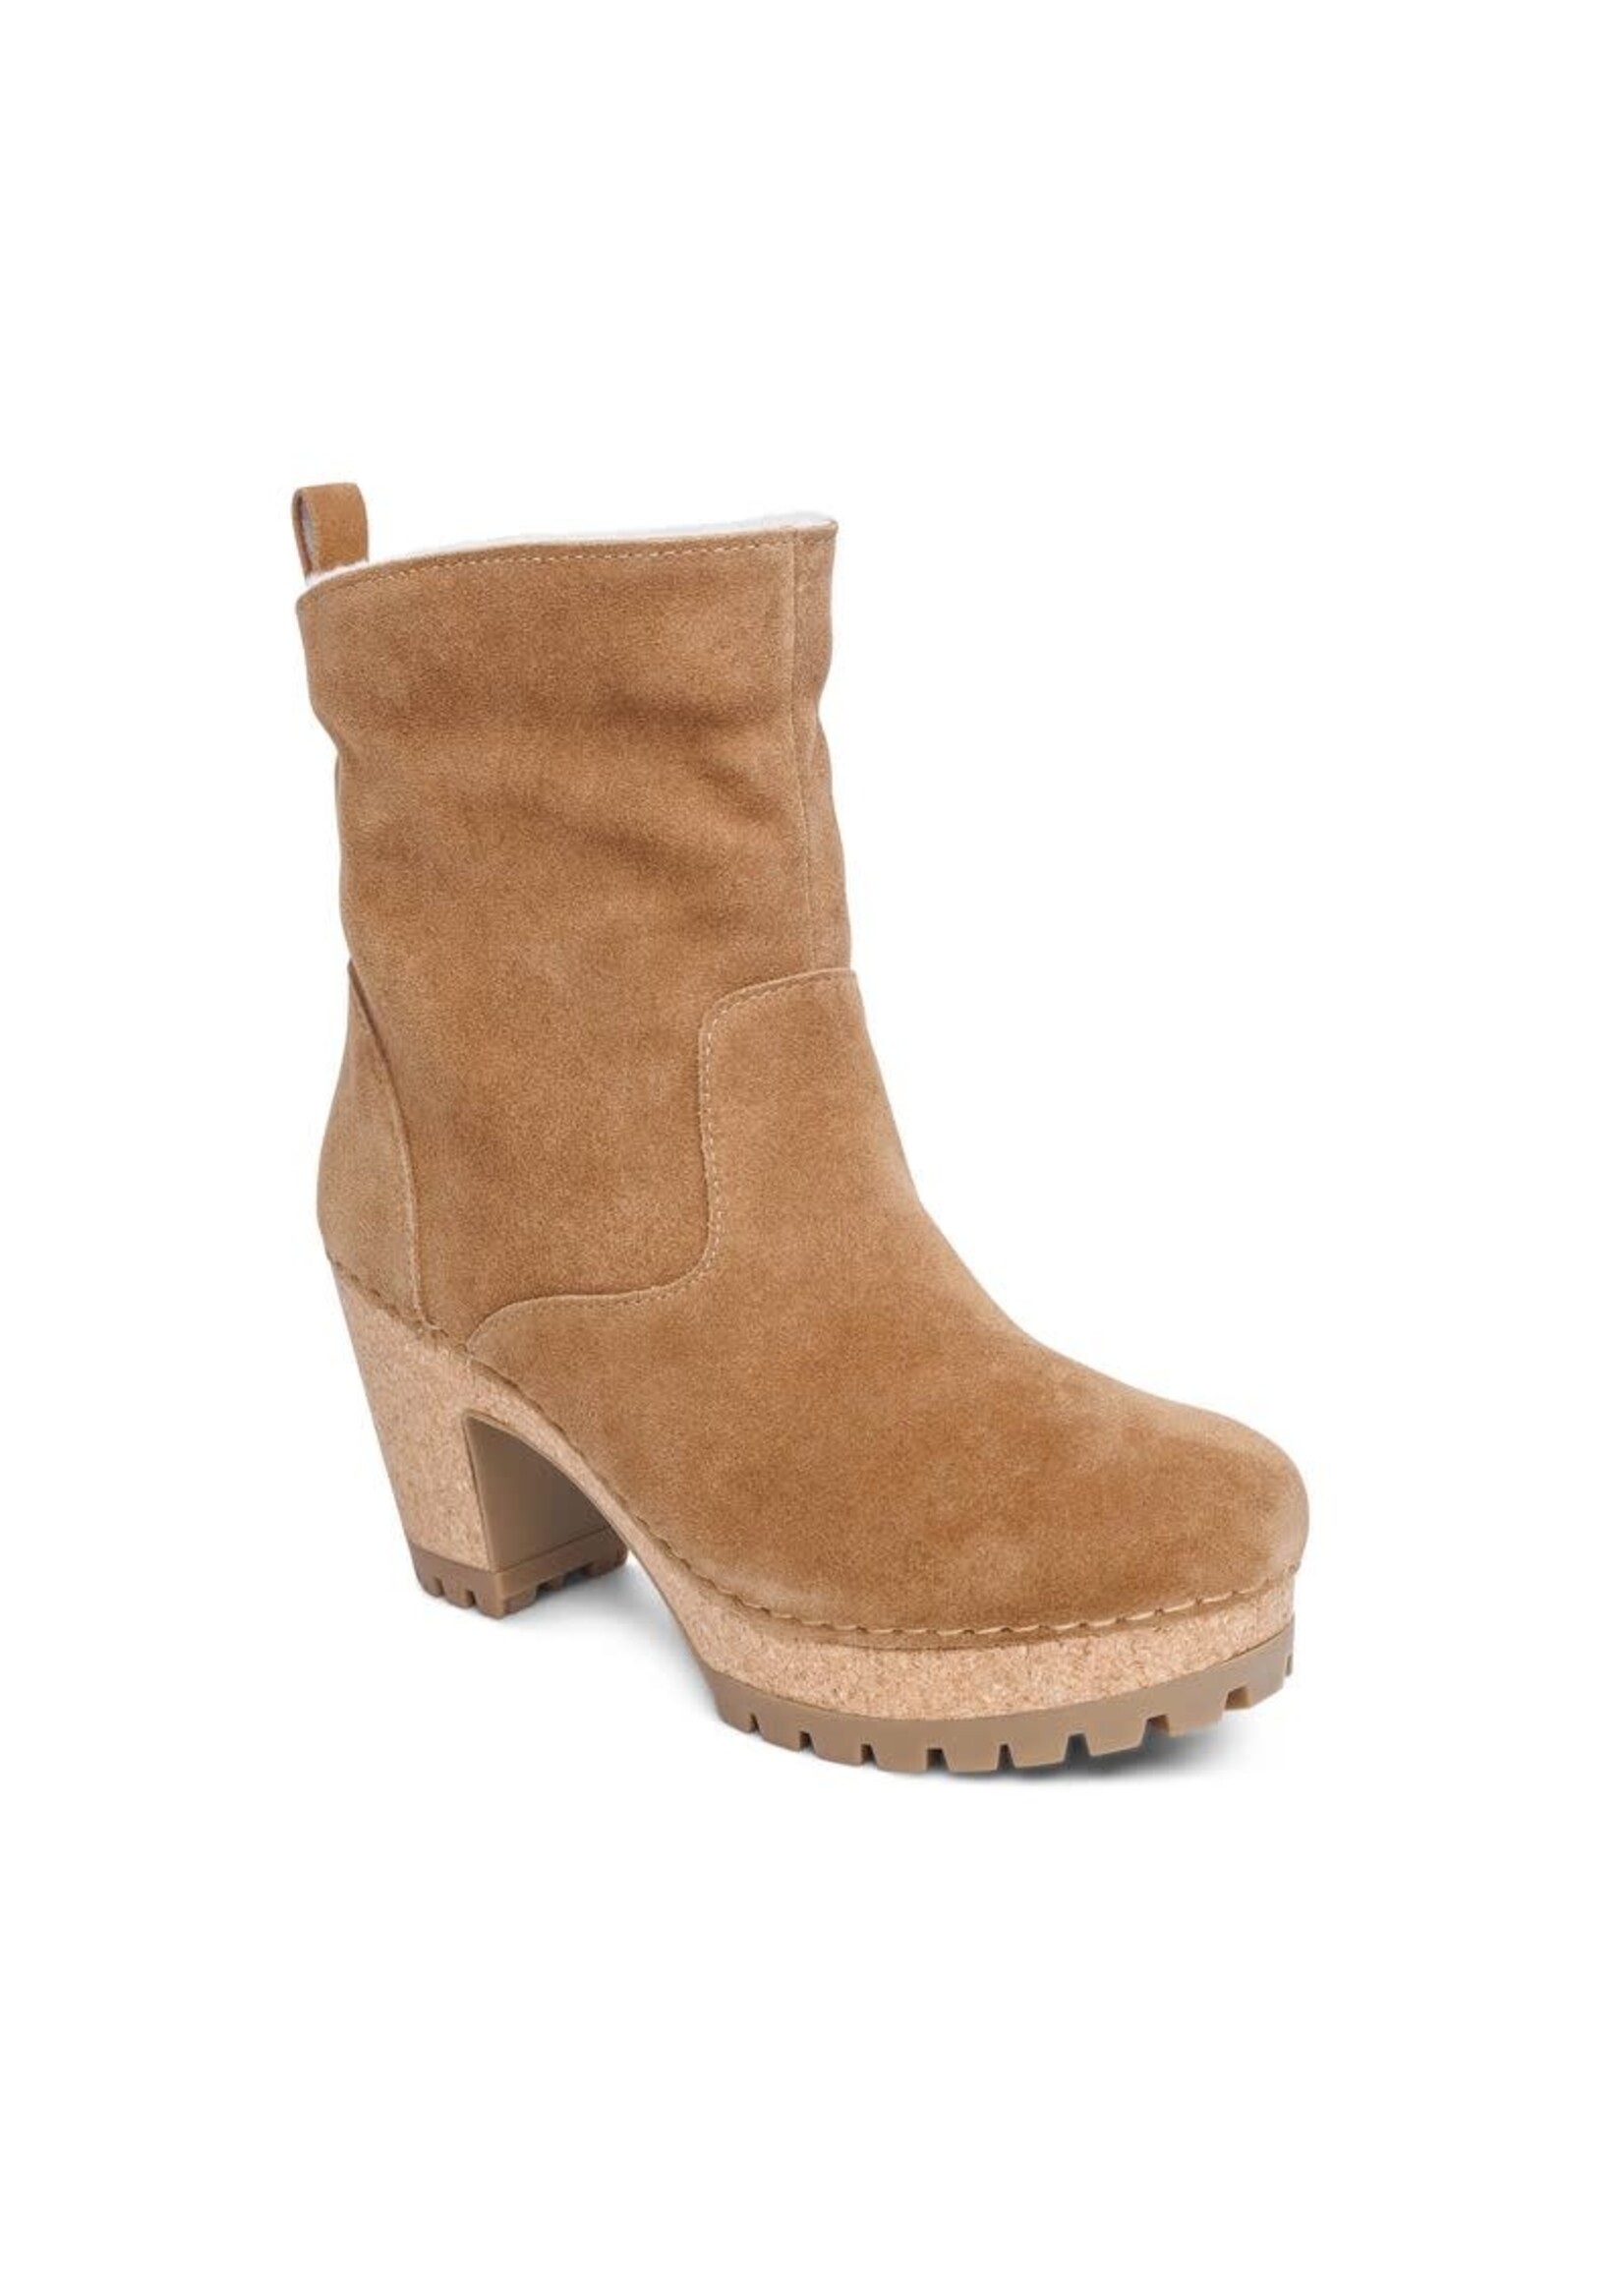 Aetrex Scarlett Cold Weather Boots in Honey Suede by Aetrex Water Resistant